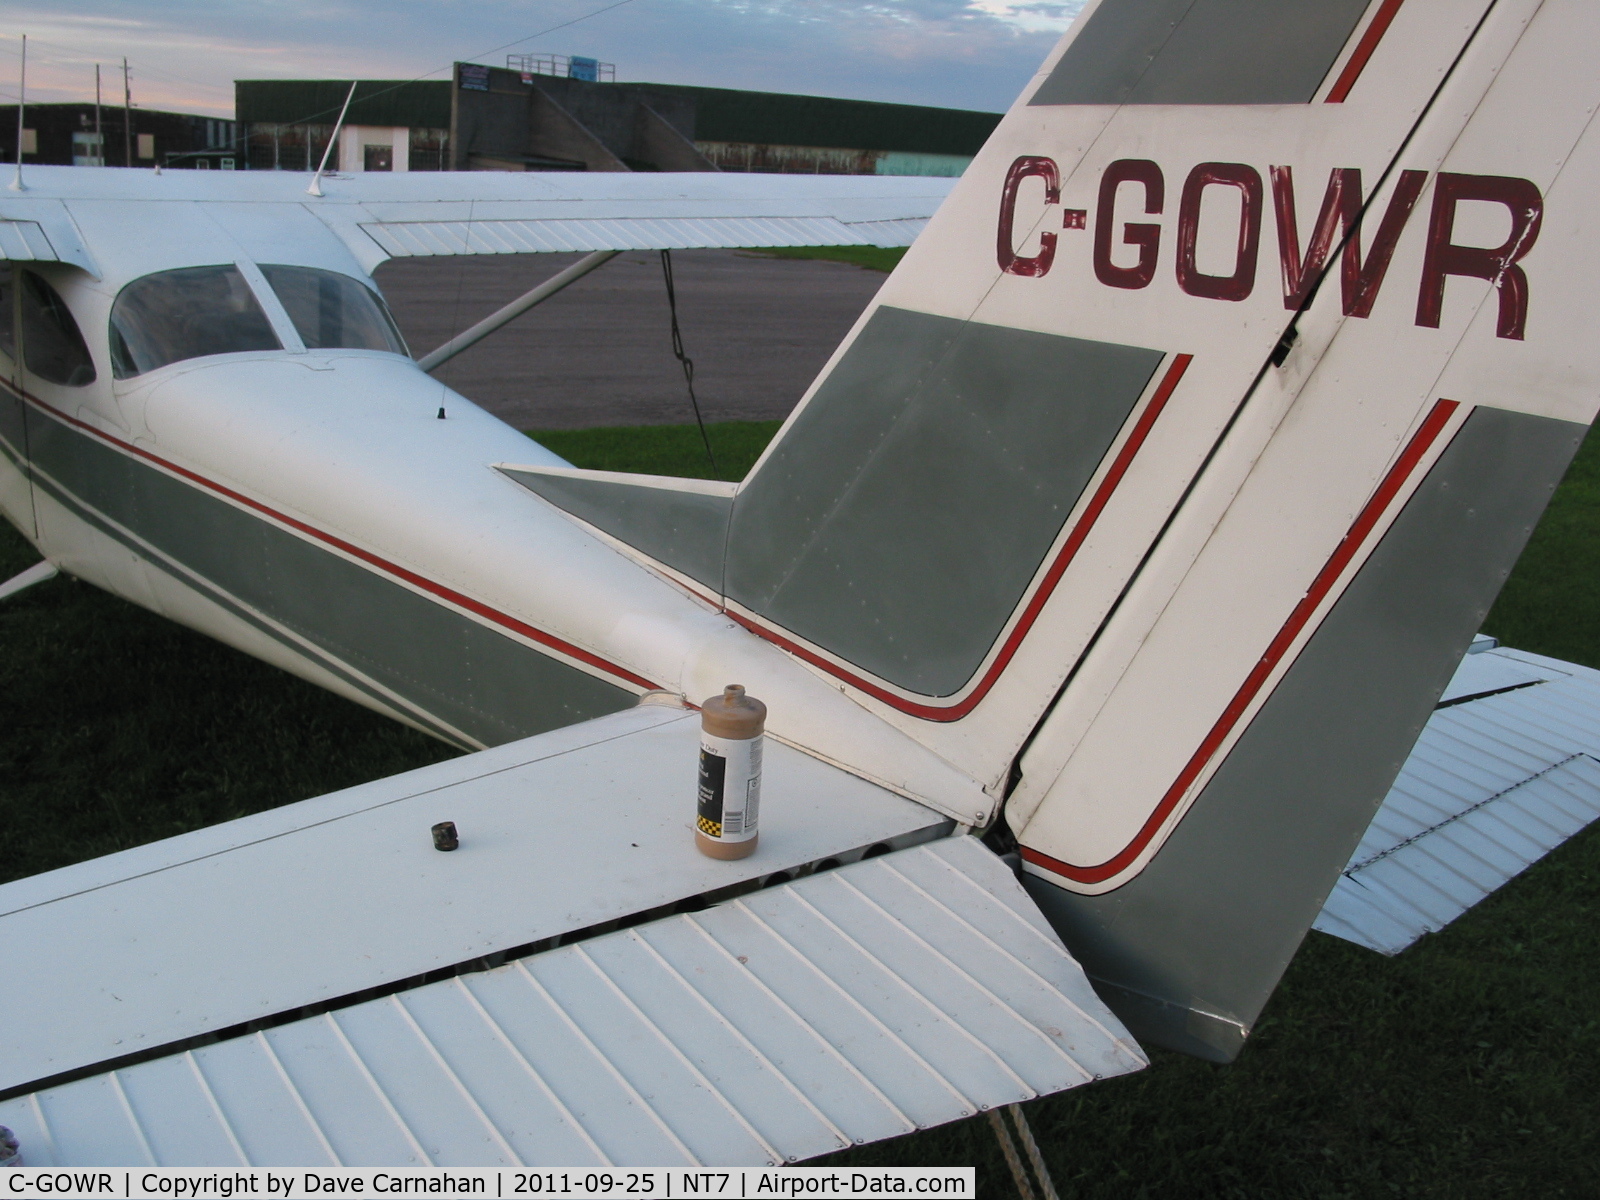 C-GOWR, 1966 Cessna 172G C/N 17253748, This aircraft was recently sold to Dave Carnahan of Trenton, Ontario. The aircraft is now based out of Picton, Ontario (NT7).